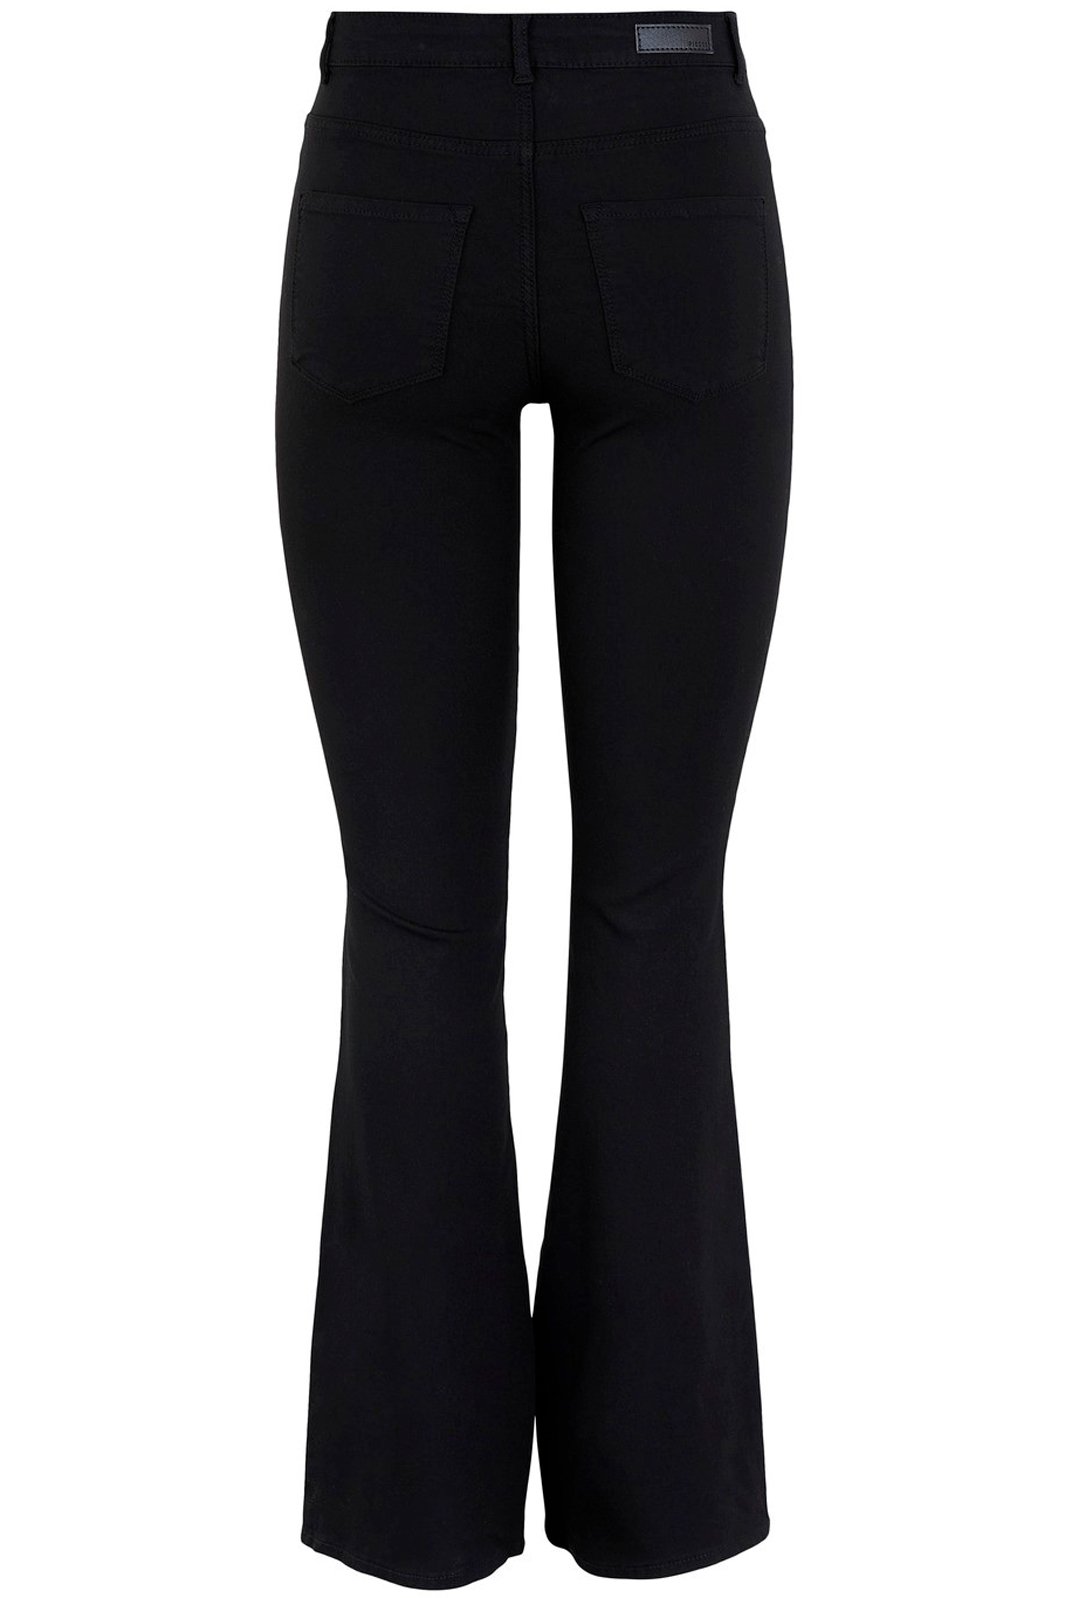 Pieces - PcHighskin Flared Pant - Black Jeans 